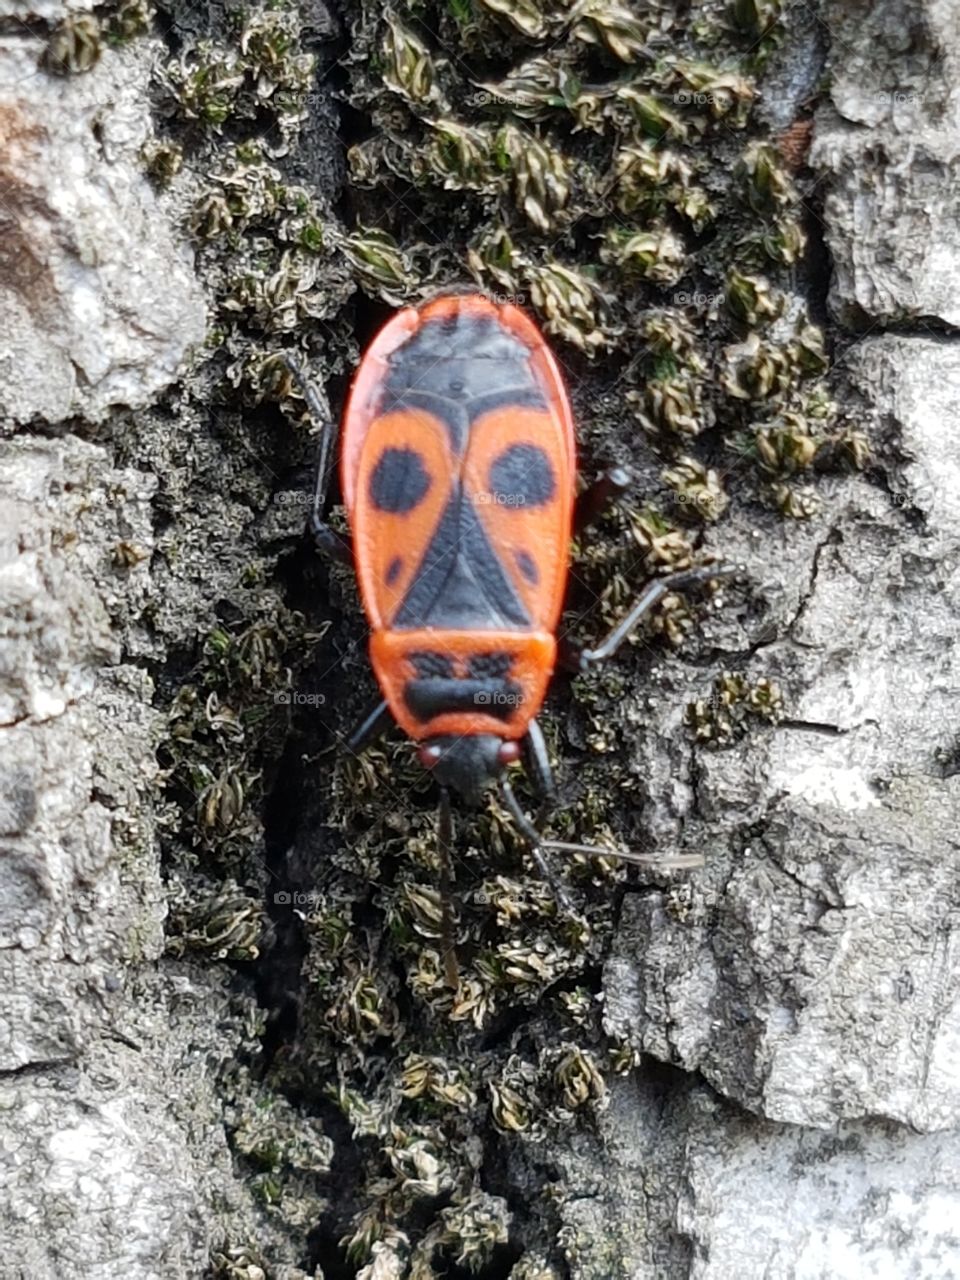 A bug's life on the tree